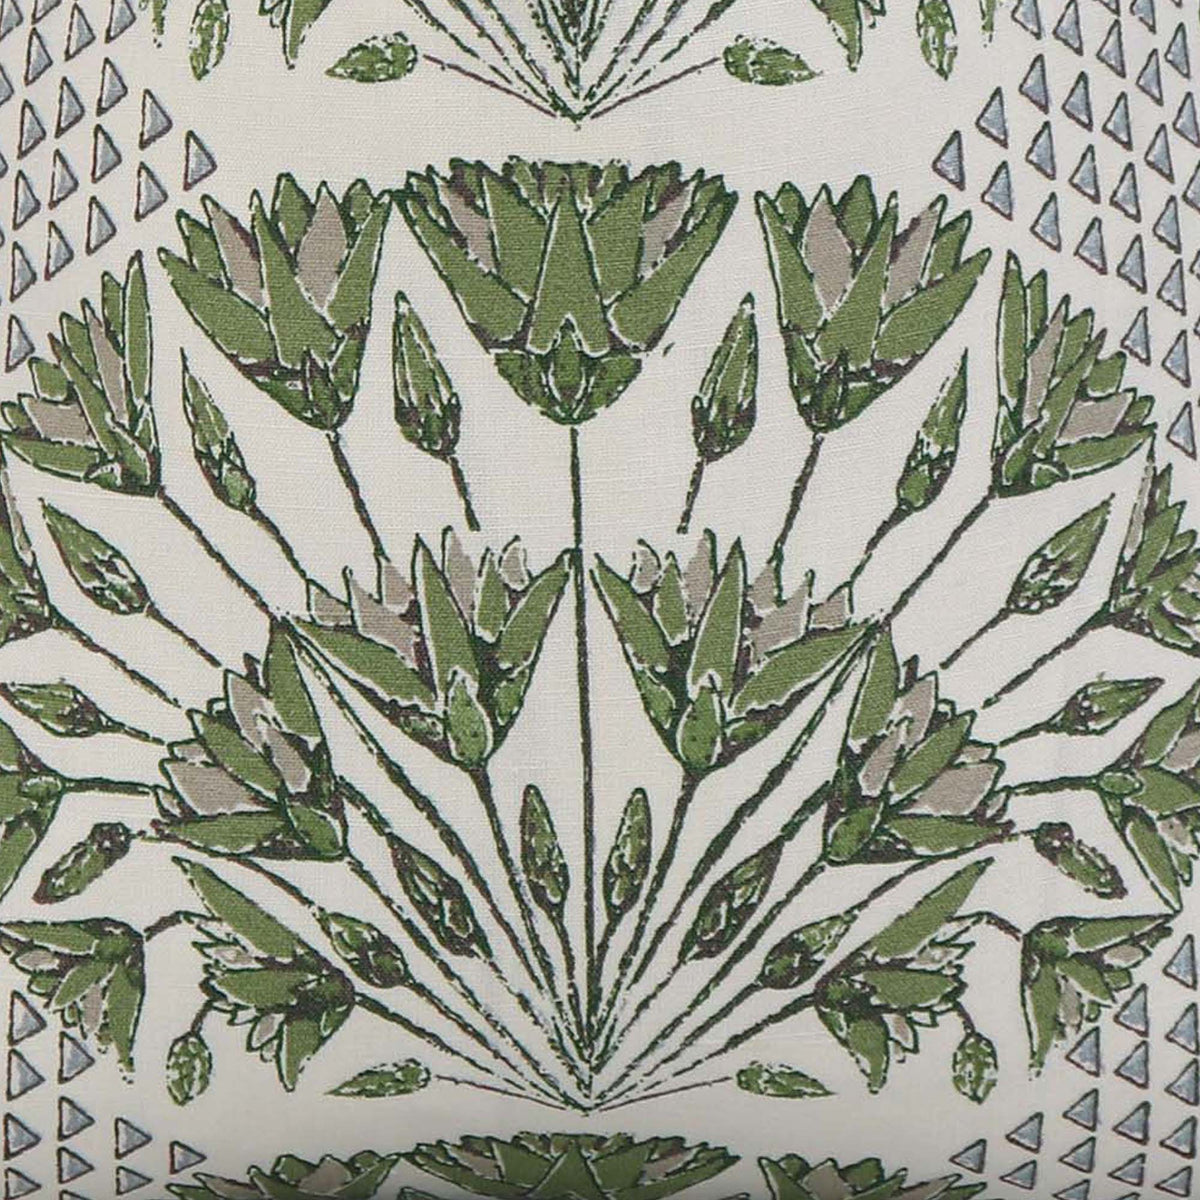 Cairo Floral Green / 4x4 inch Fabric Swatch